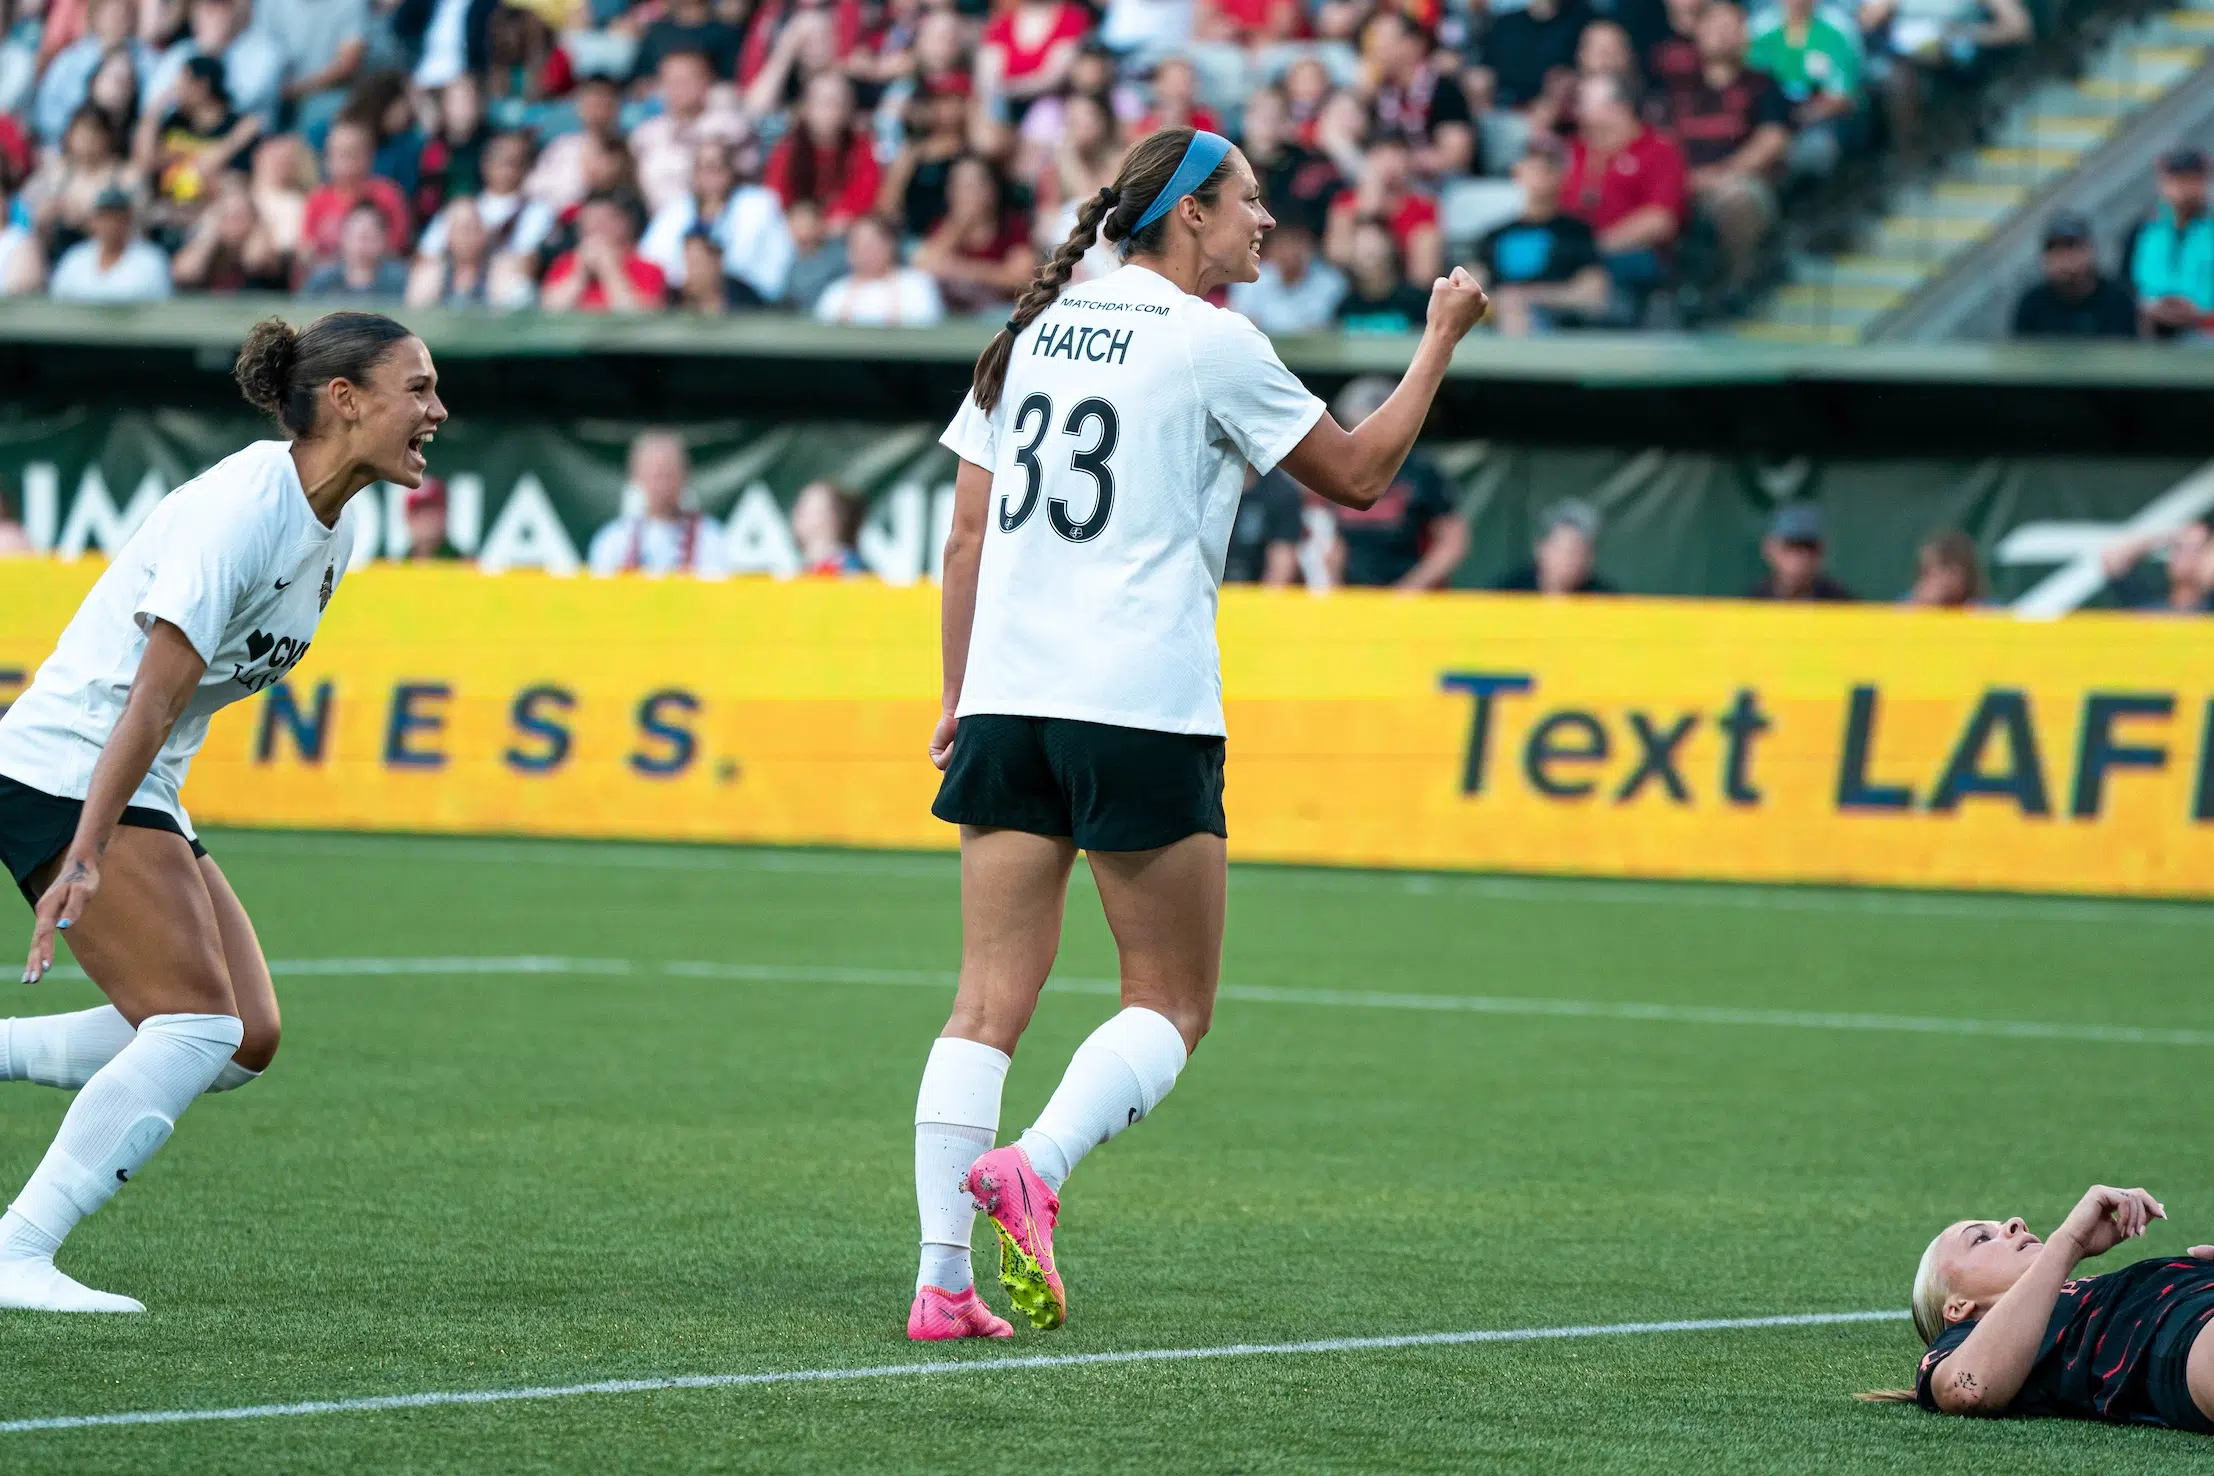 Ashley Hatch in a white top, black shorts and pink cleats pumps her fist in celebration as Trinity Rodman cheers and runs towards her.